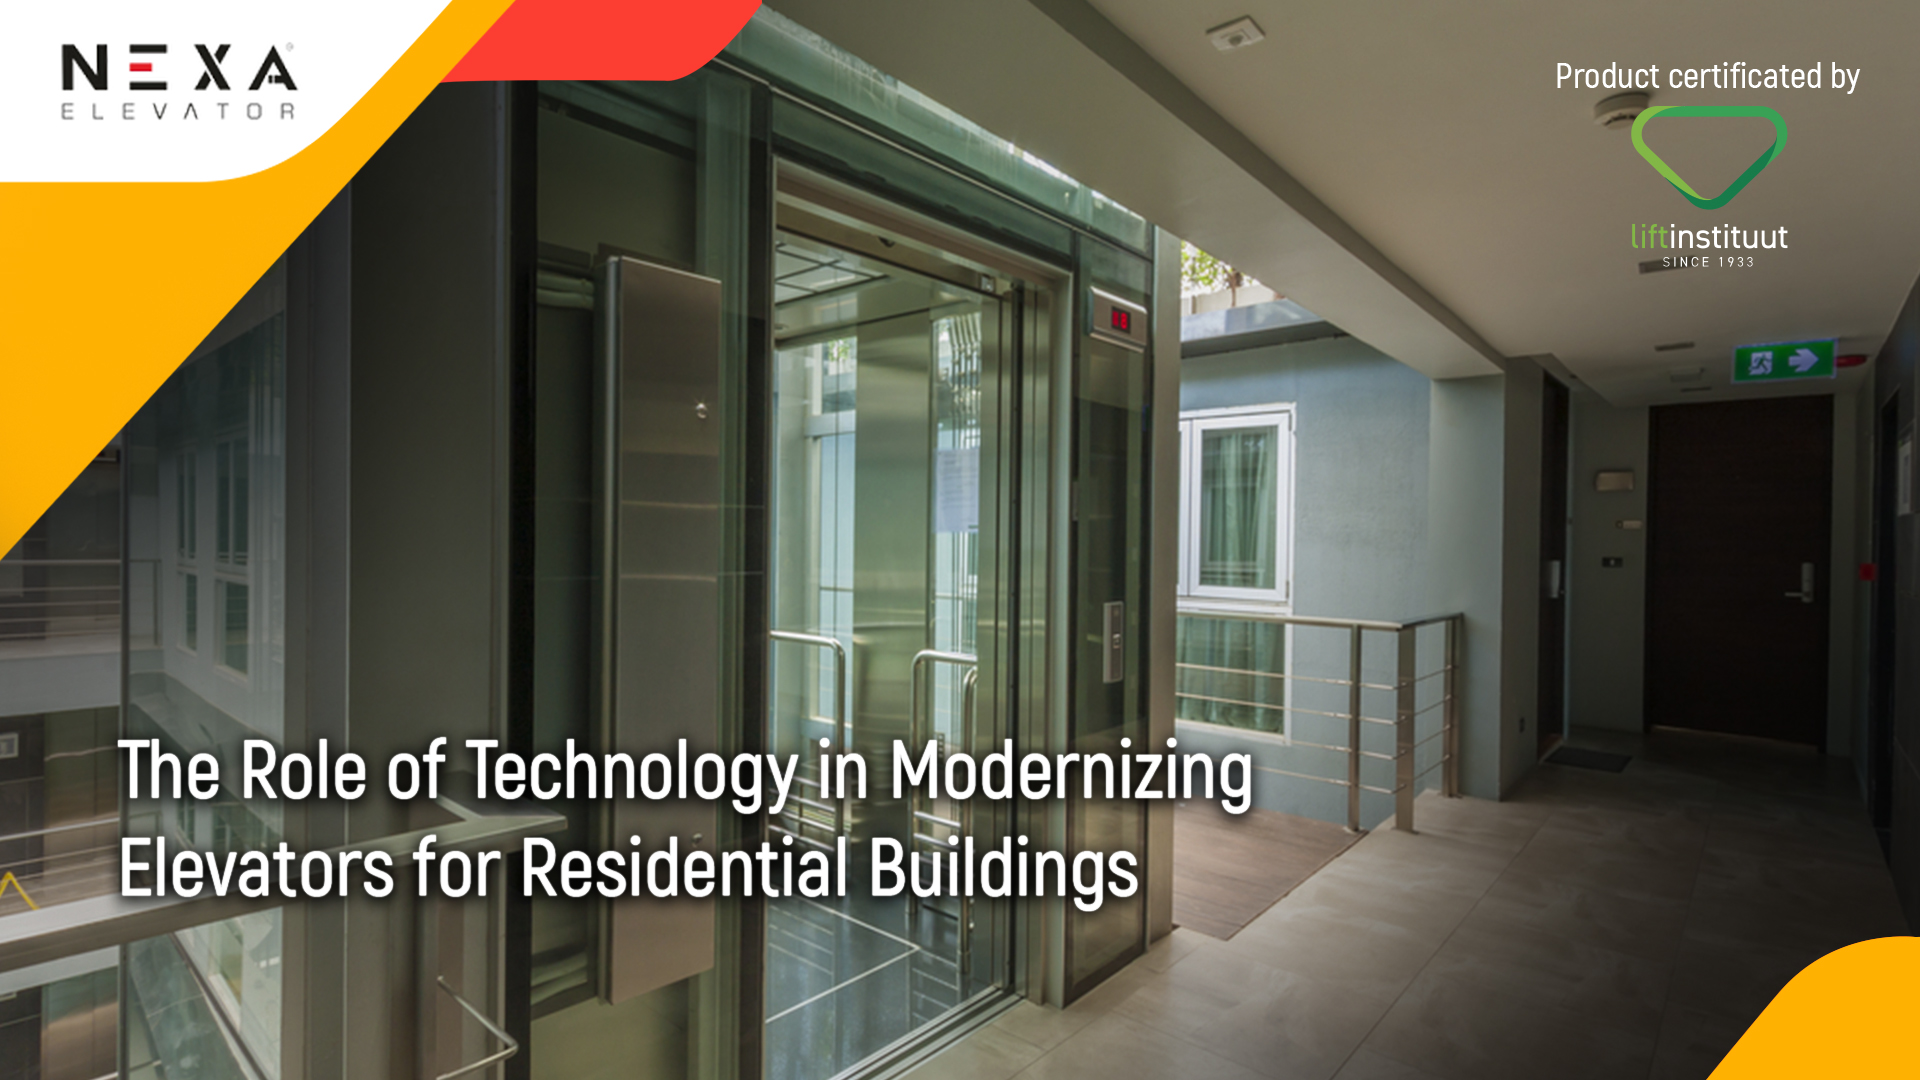 The Role of Technology in Modernizing Elevators for Residential Buildings